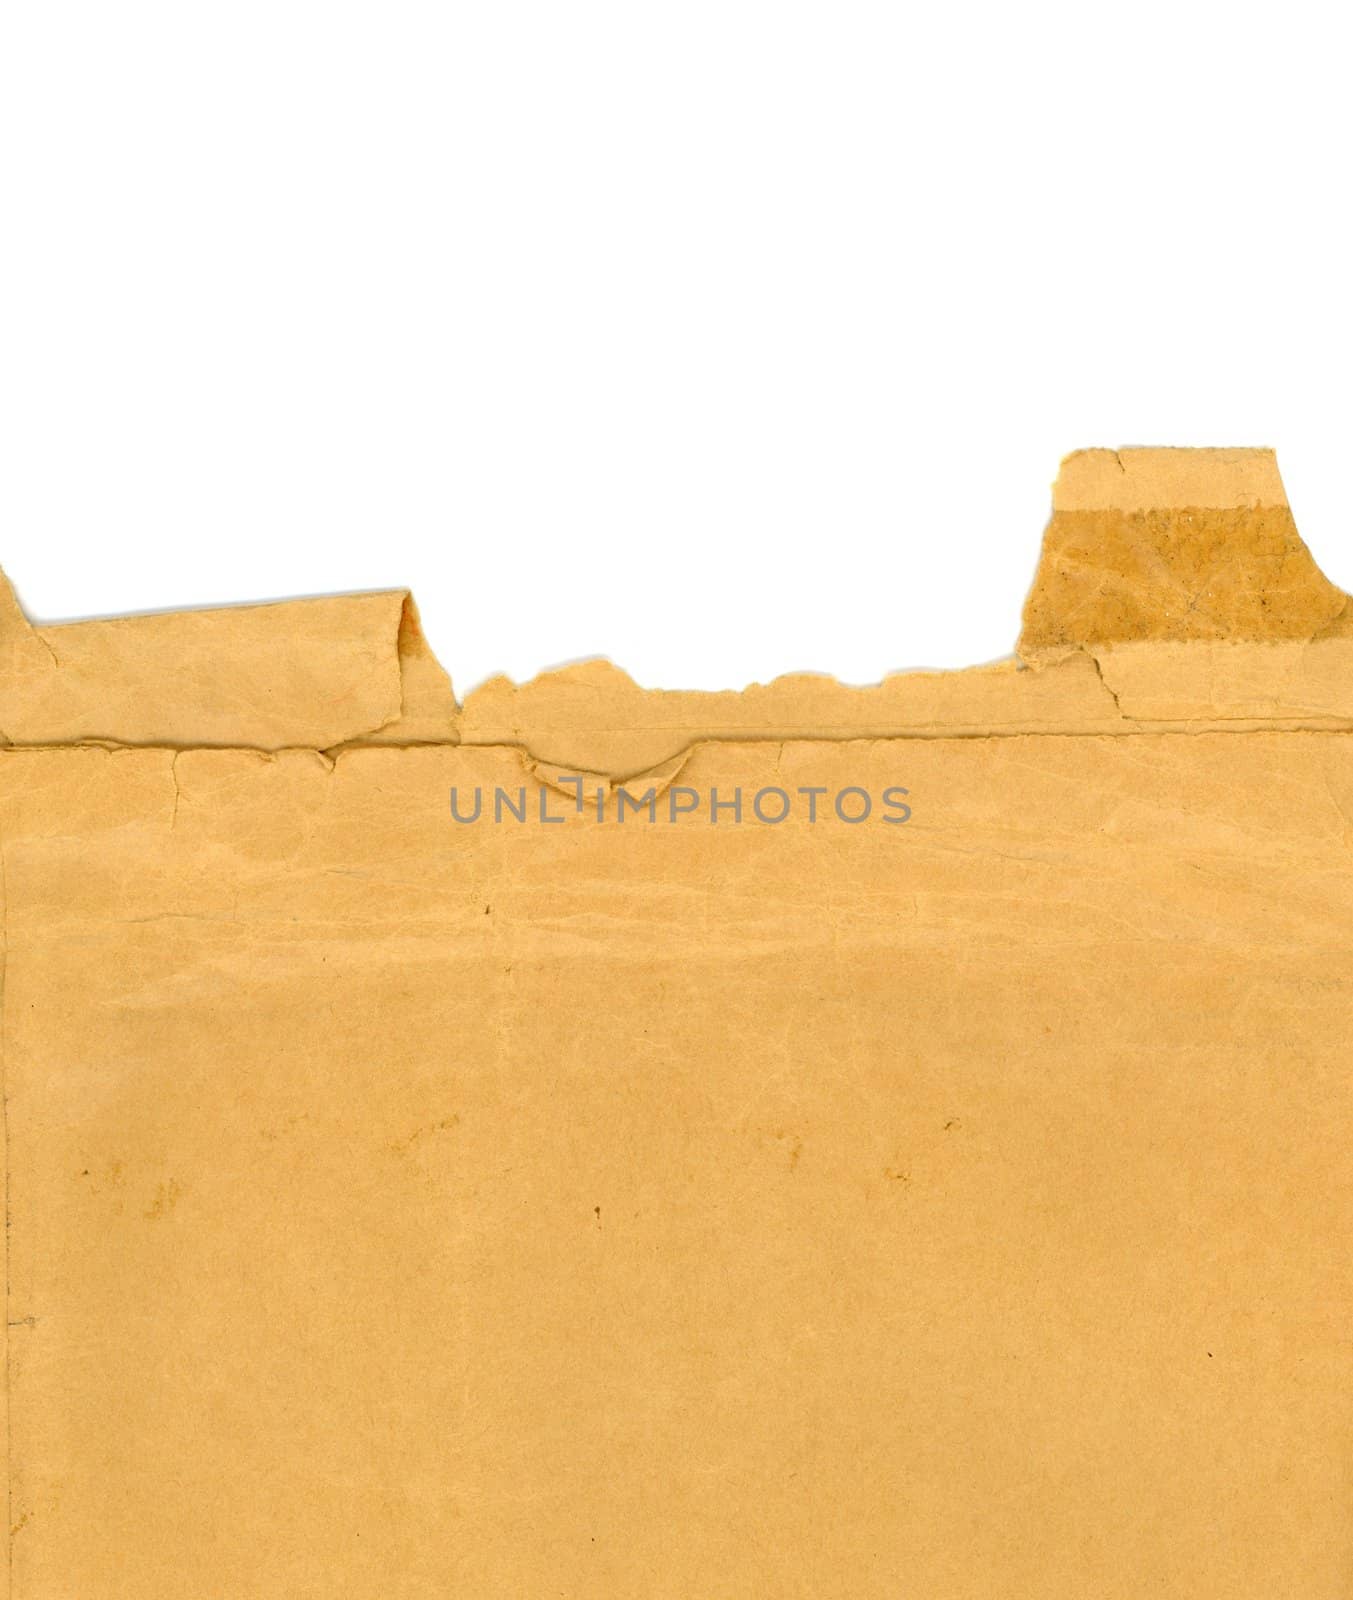 light brown paper texture useful as a background with copy space